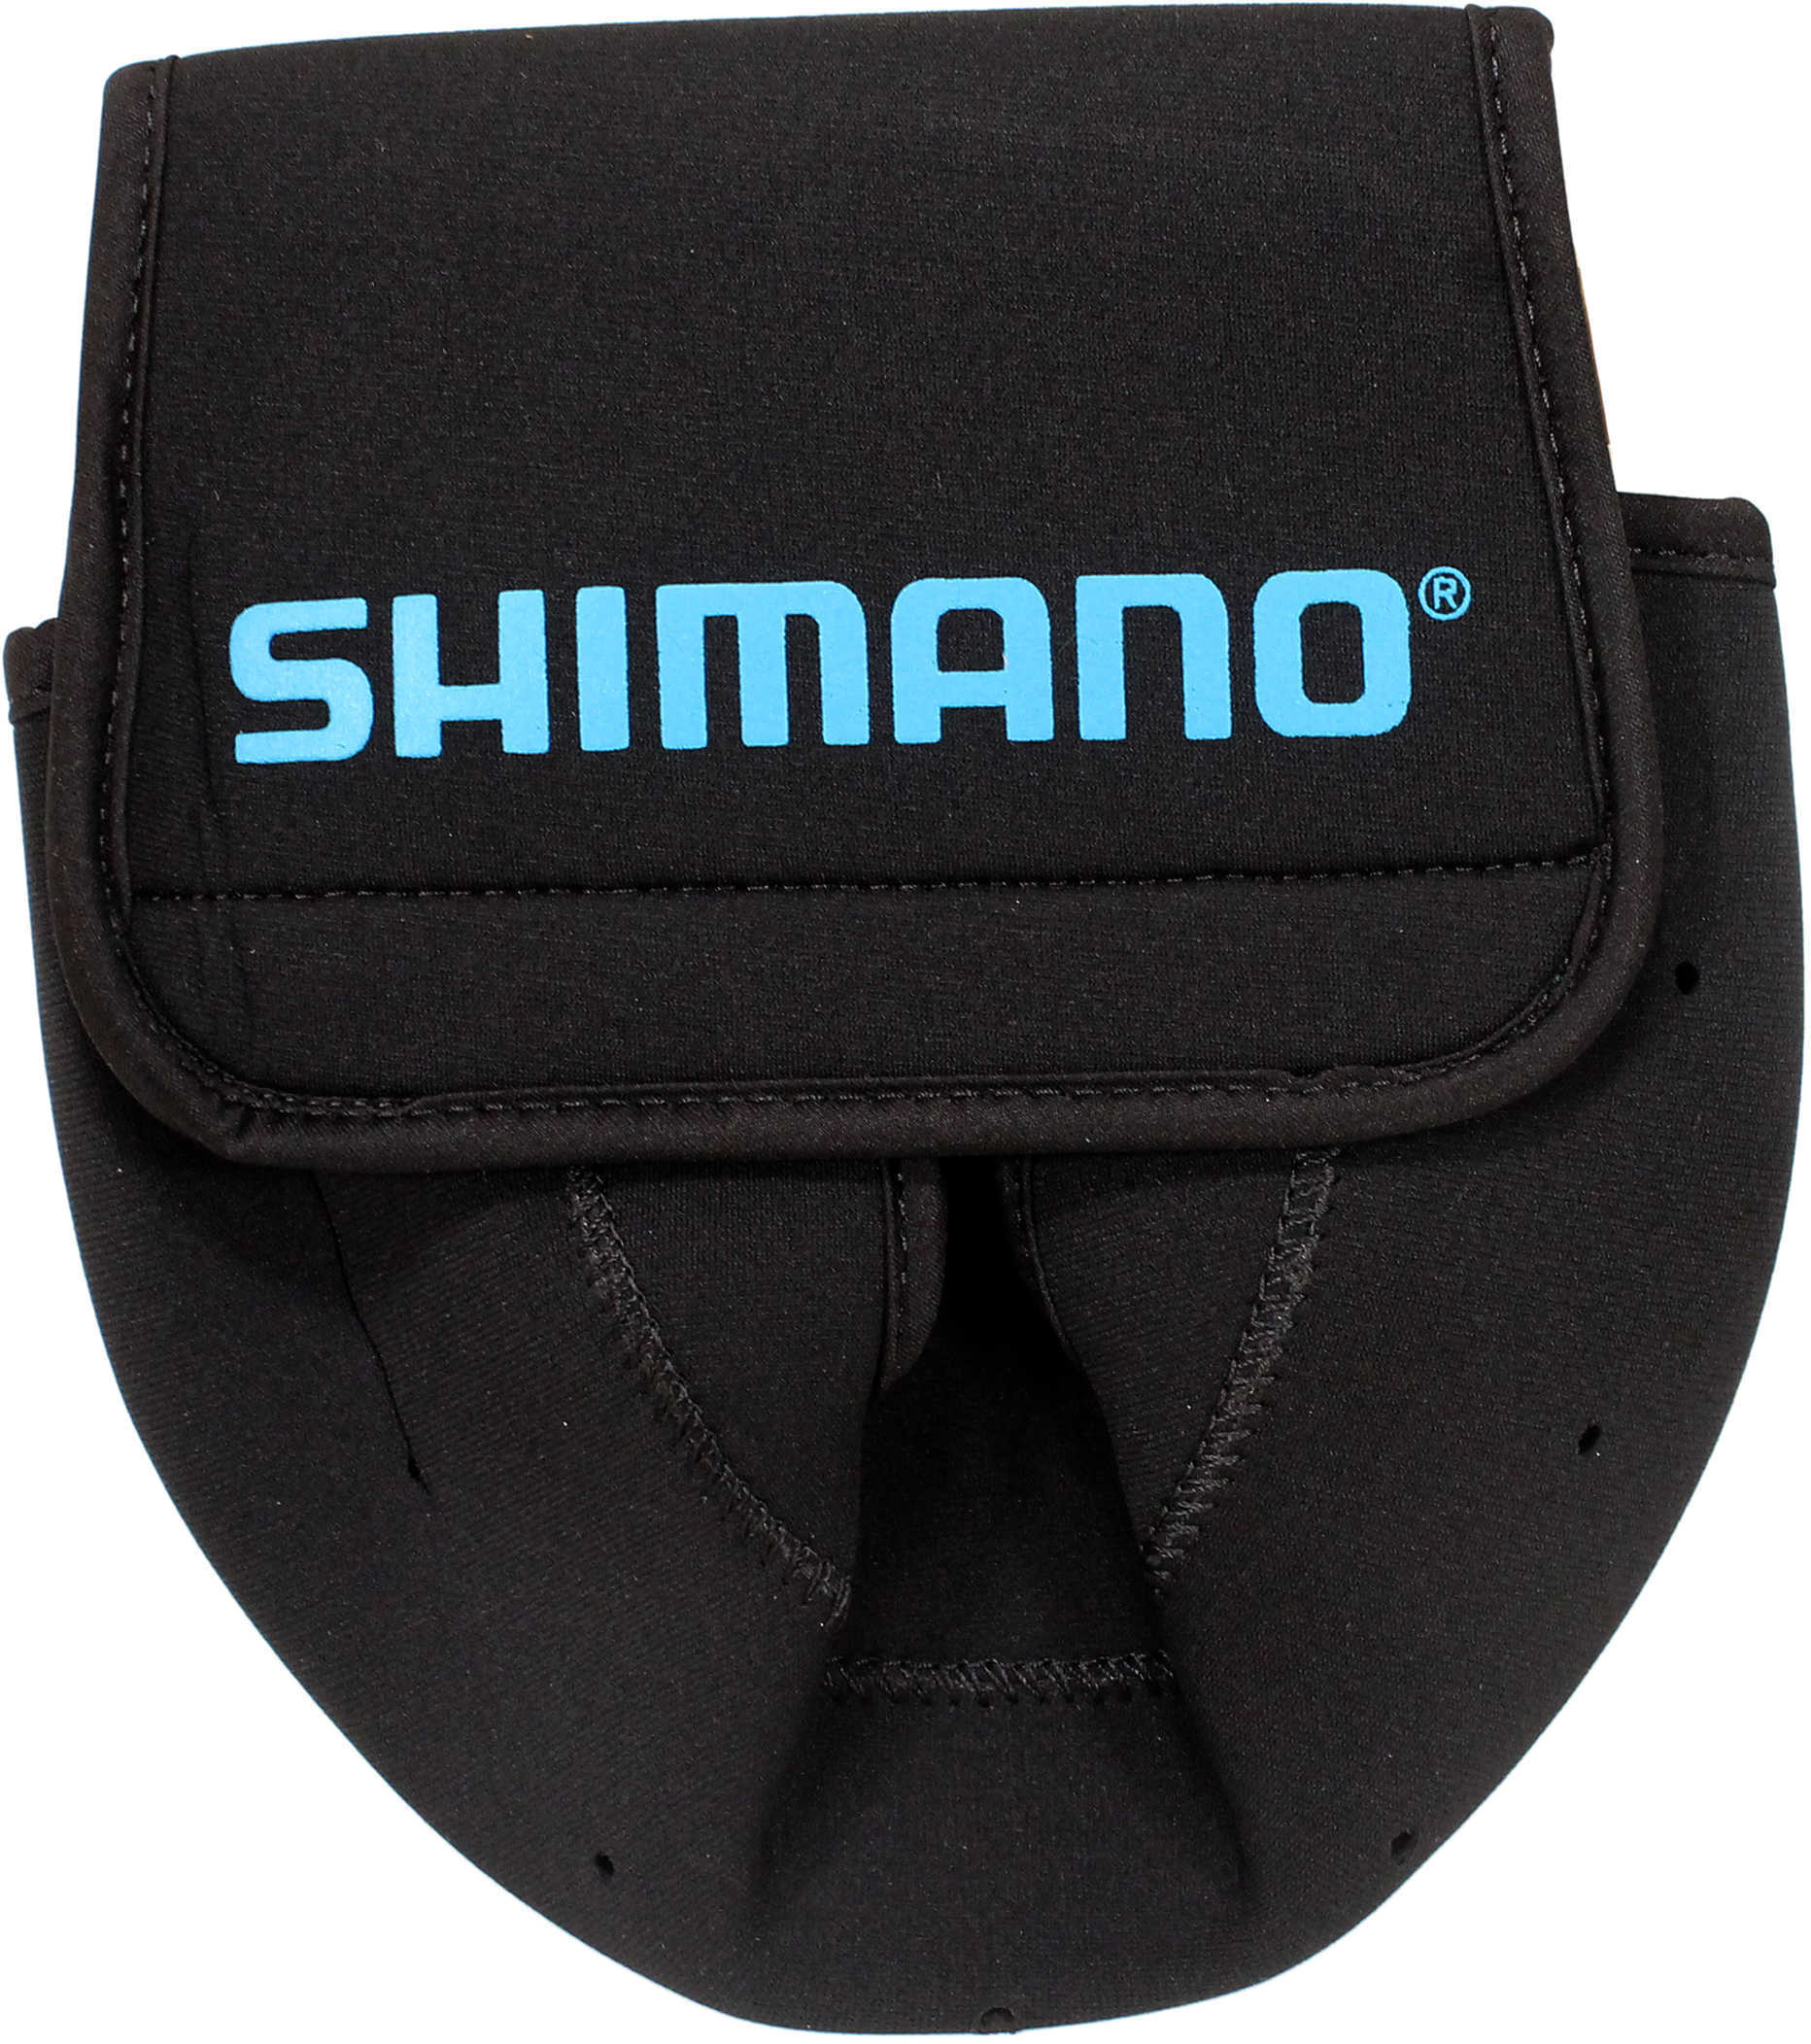 Shimano Neoprene Spinning Reel Cover Large, Black Md: ANSC850A - 11214080